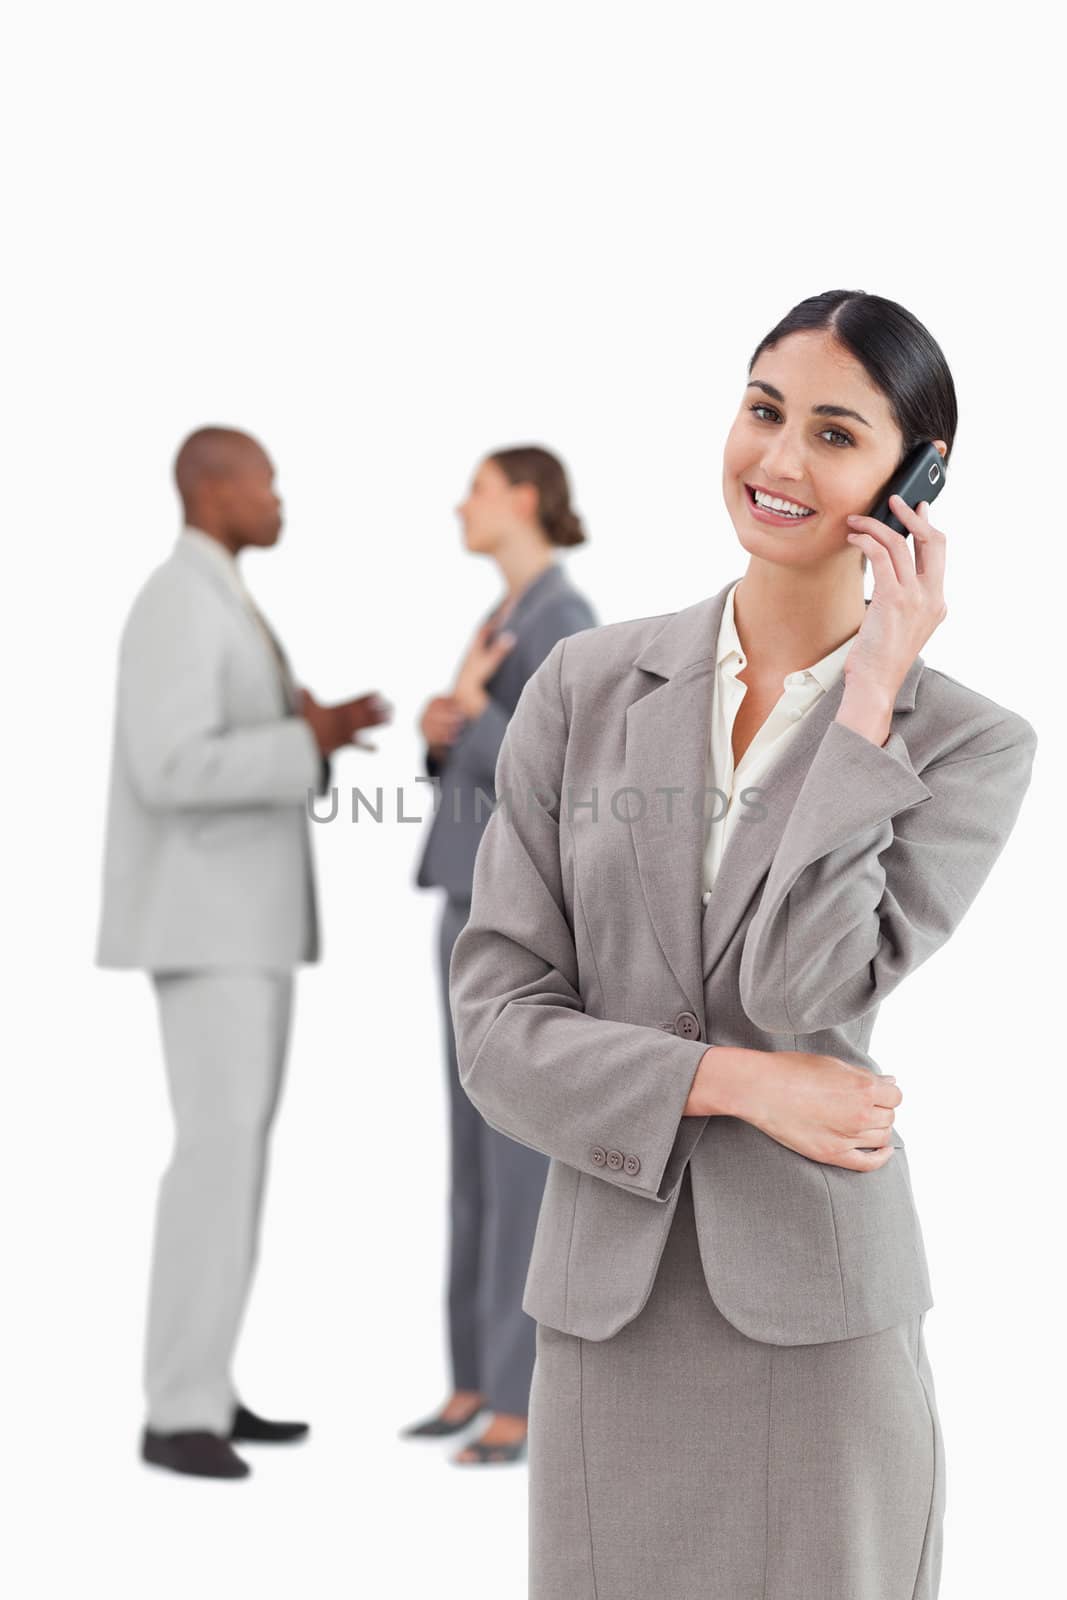 Smiling saleswoman with cellphone and colleagues behind her against a white background